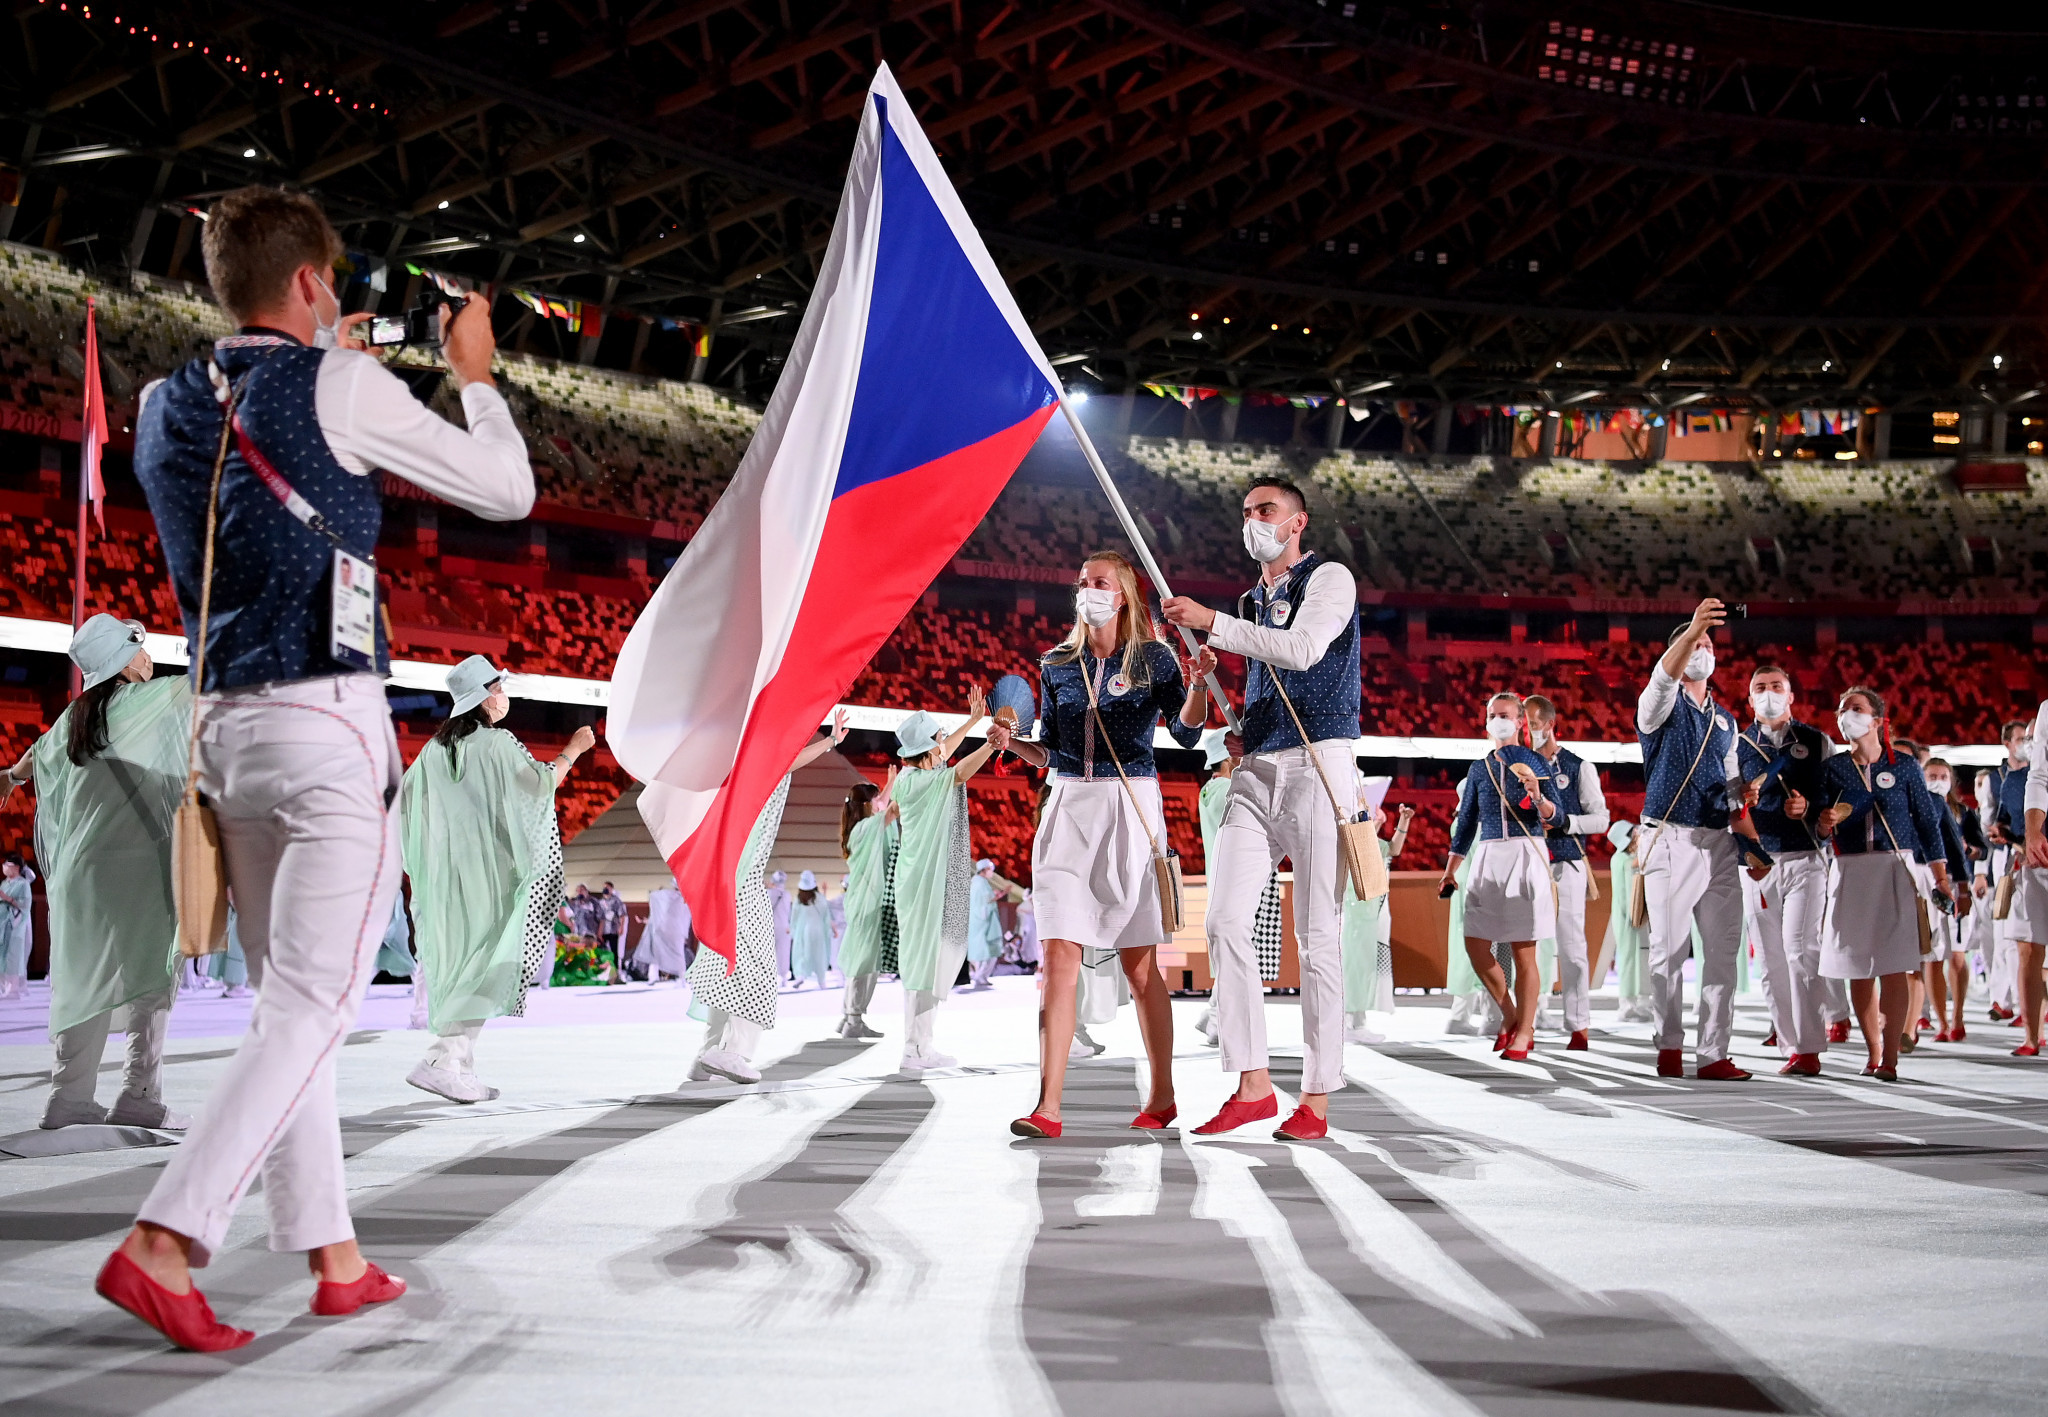 Czech Olympic Committee rules out boycotting Paris 2024 over Russian participation